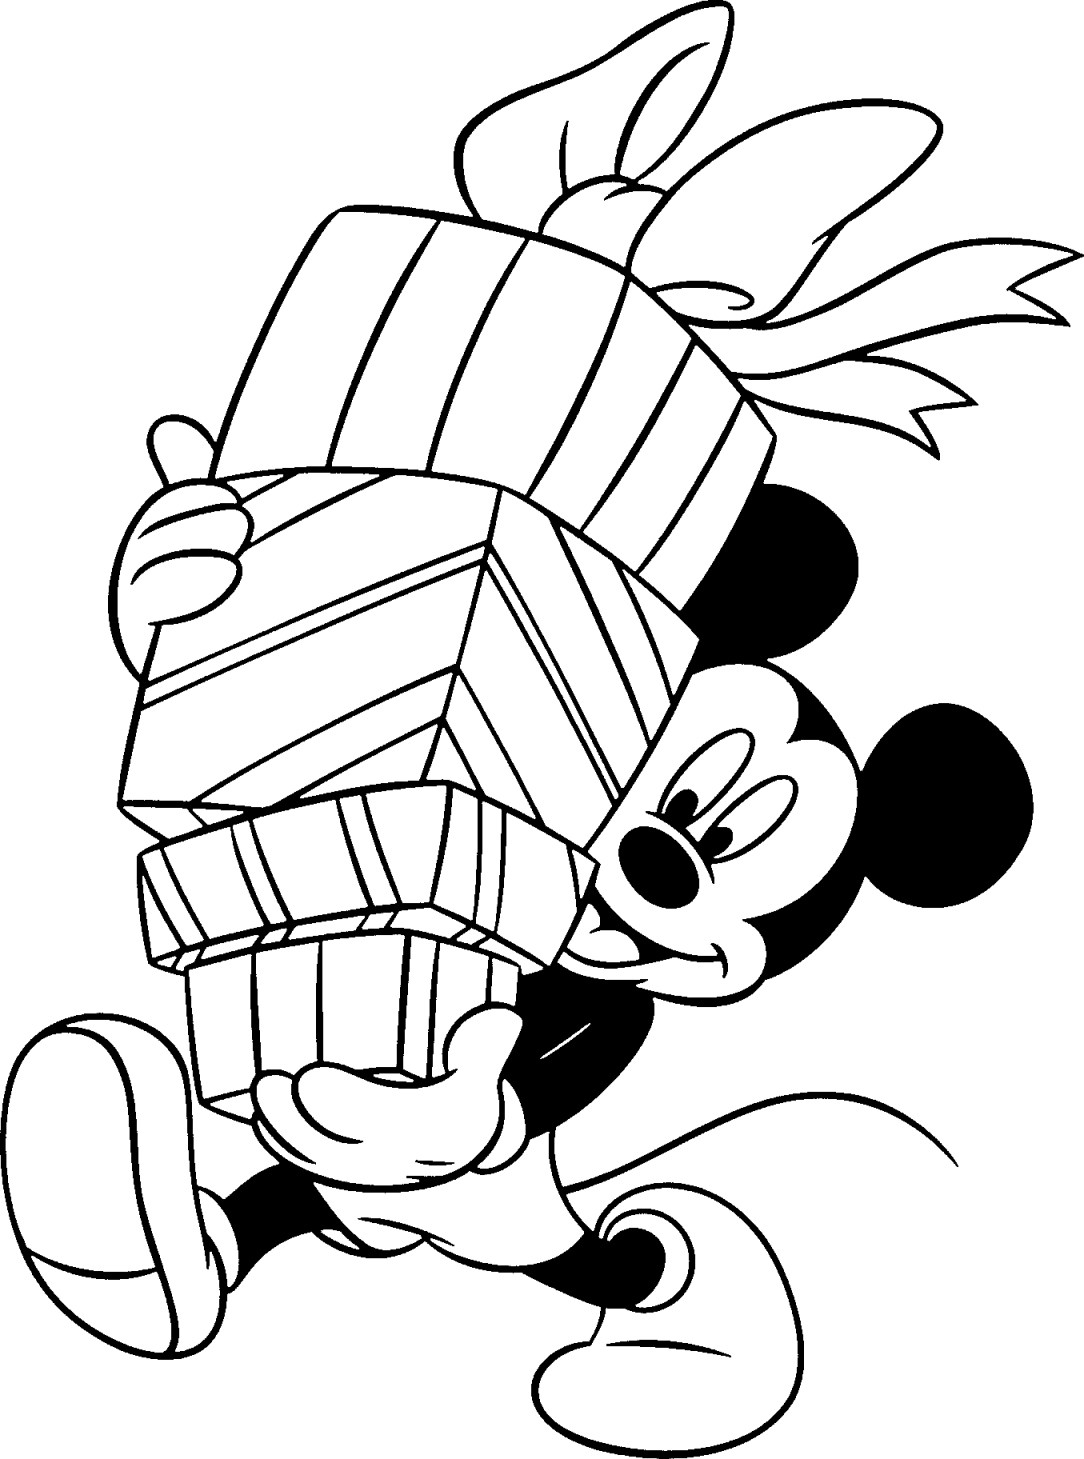 Free Mickey Mouse Coloring Pages
 birthday mickey mouse coloring pages PINTEREST birthday